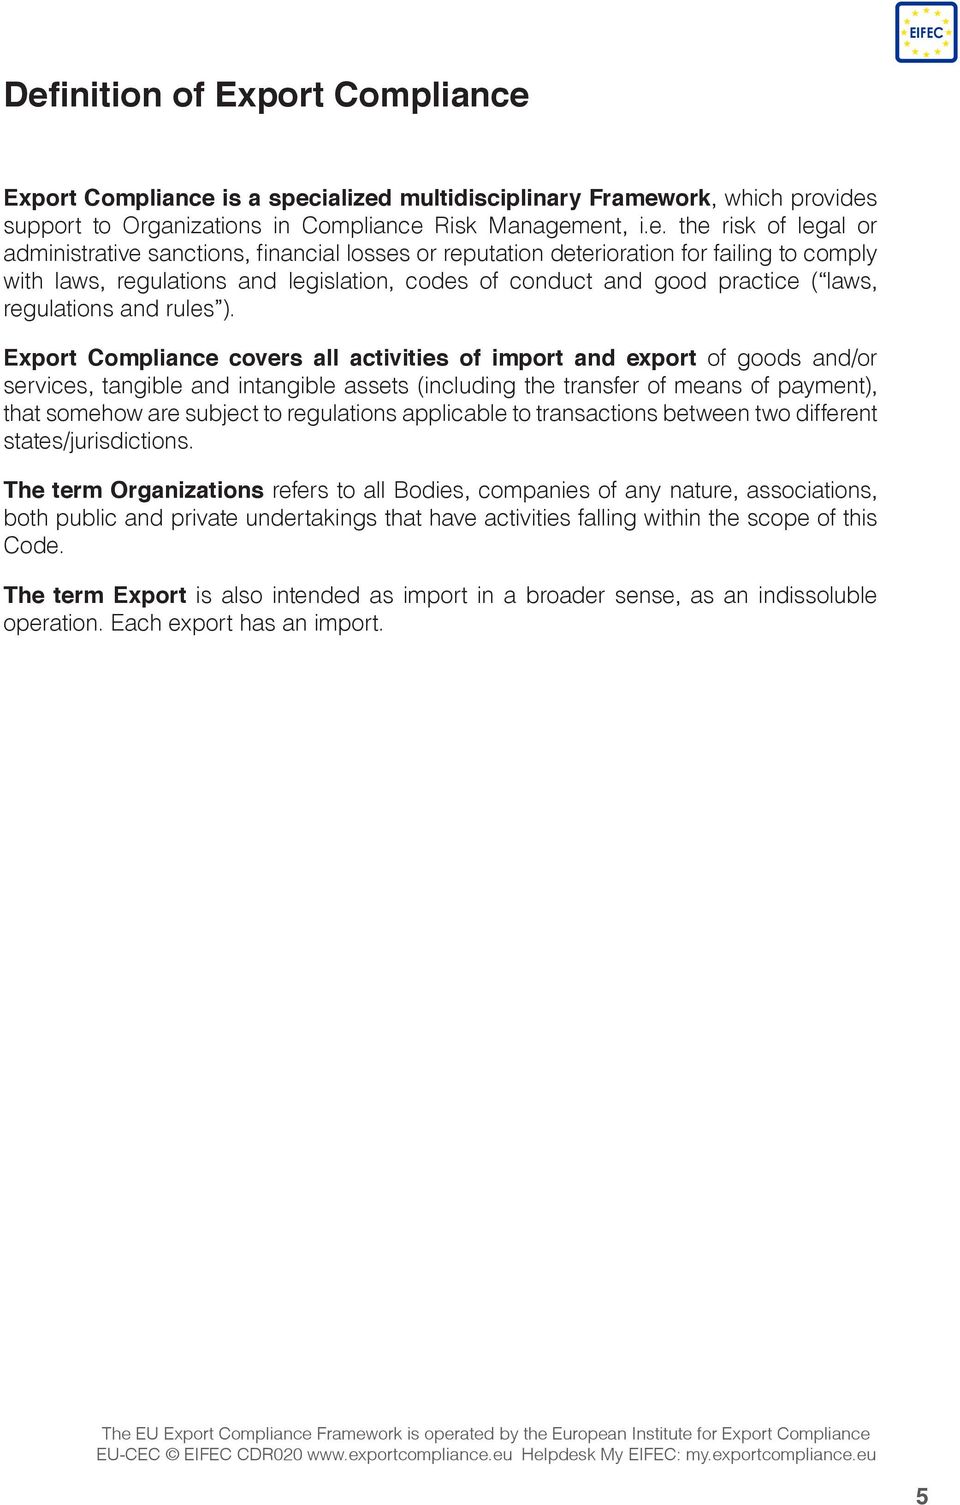 Export Compliance covers all activities of import and export of goods and/or services, tangible and intangible assets (including the transfer of means of payment), that somehow are subject to